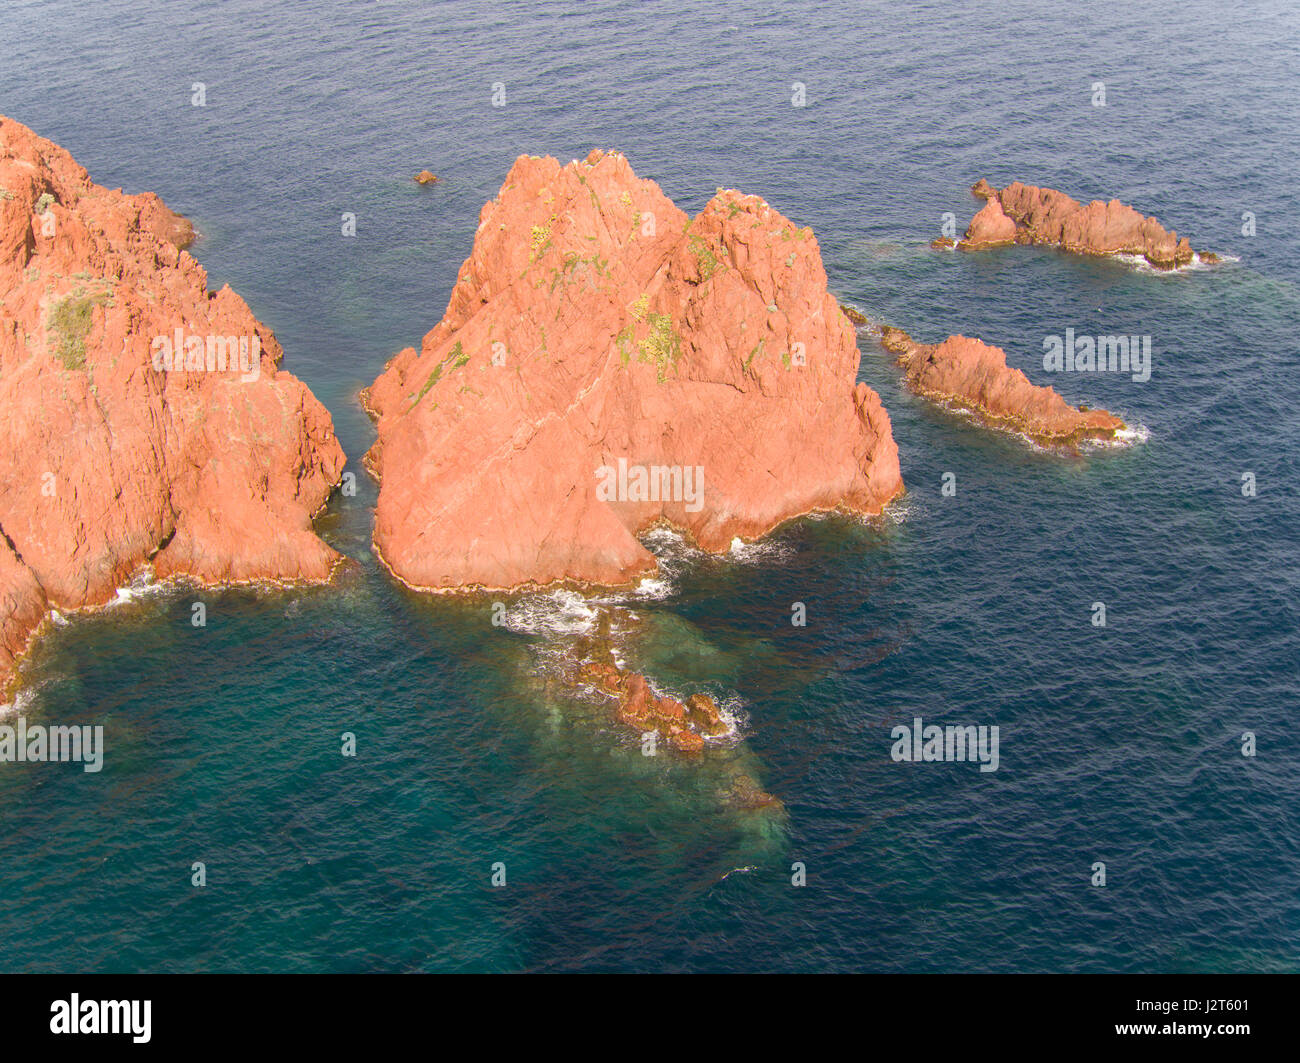 AERIAL VIEW. Sea stack off the coast of the Esterel Massif. Cap du Dramont, Saint-Raphaël, Var, French Riviera, France. Stock Photo